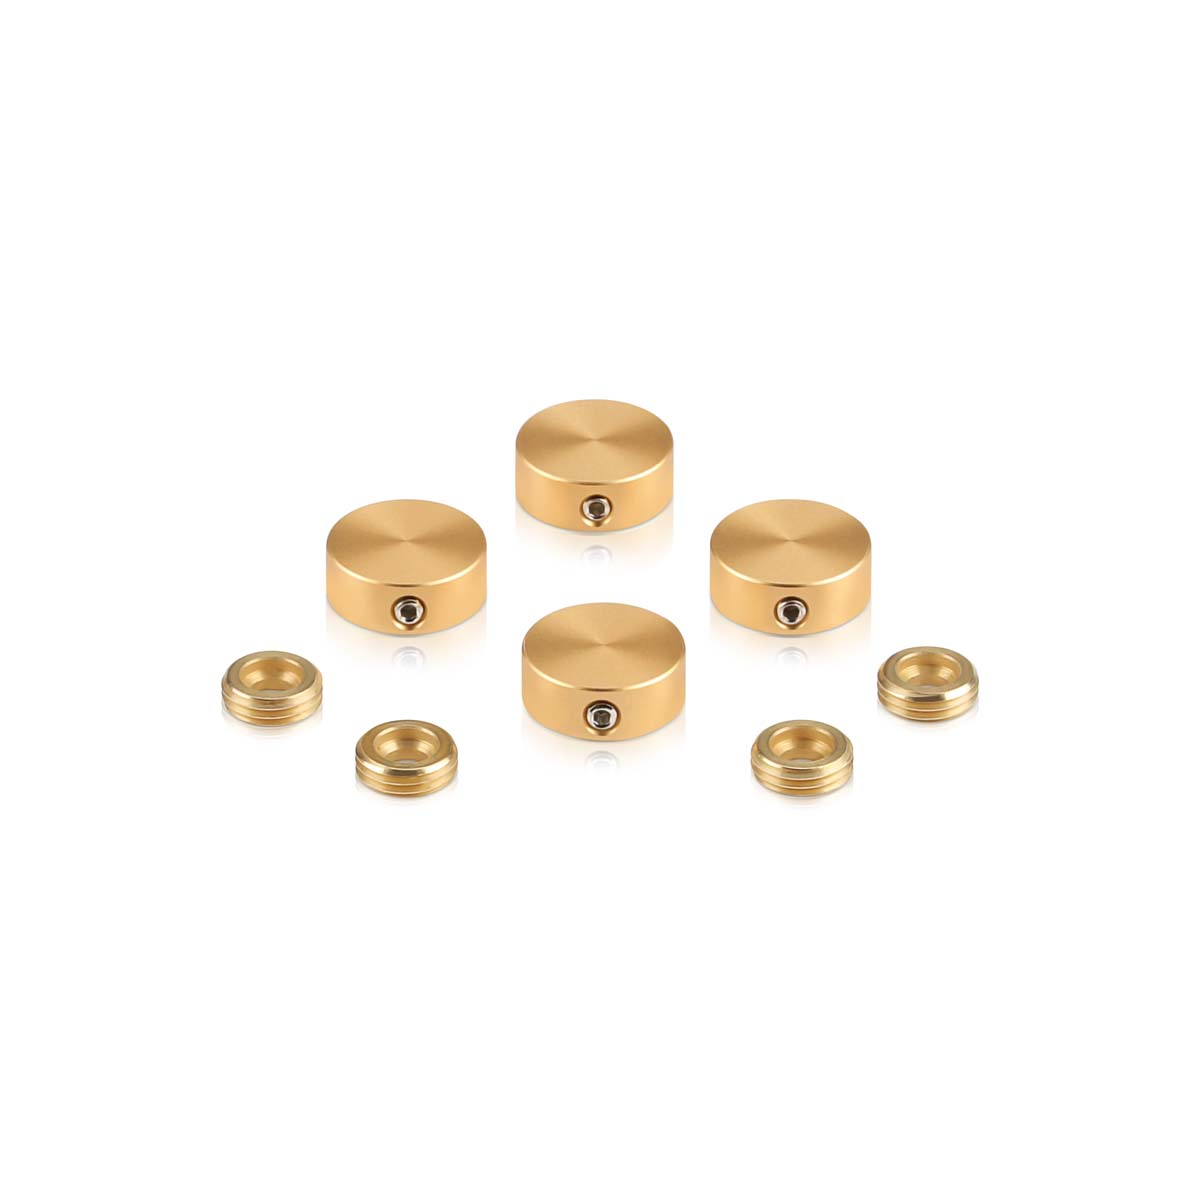 Set of 4 Locking Screw Cover, Diameter: 5/8'', Aluminum Champagne Anodized Finish, (Indoor or Outdoor Use)